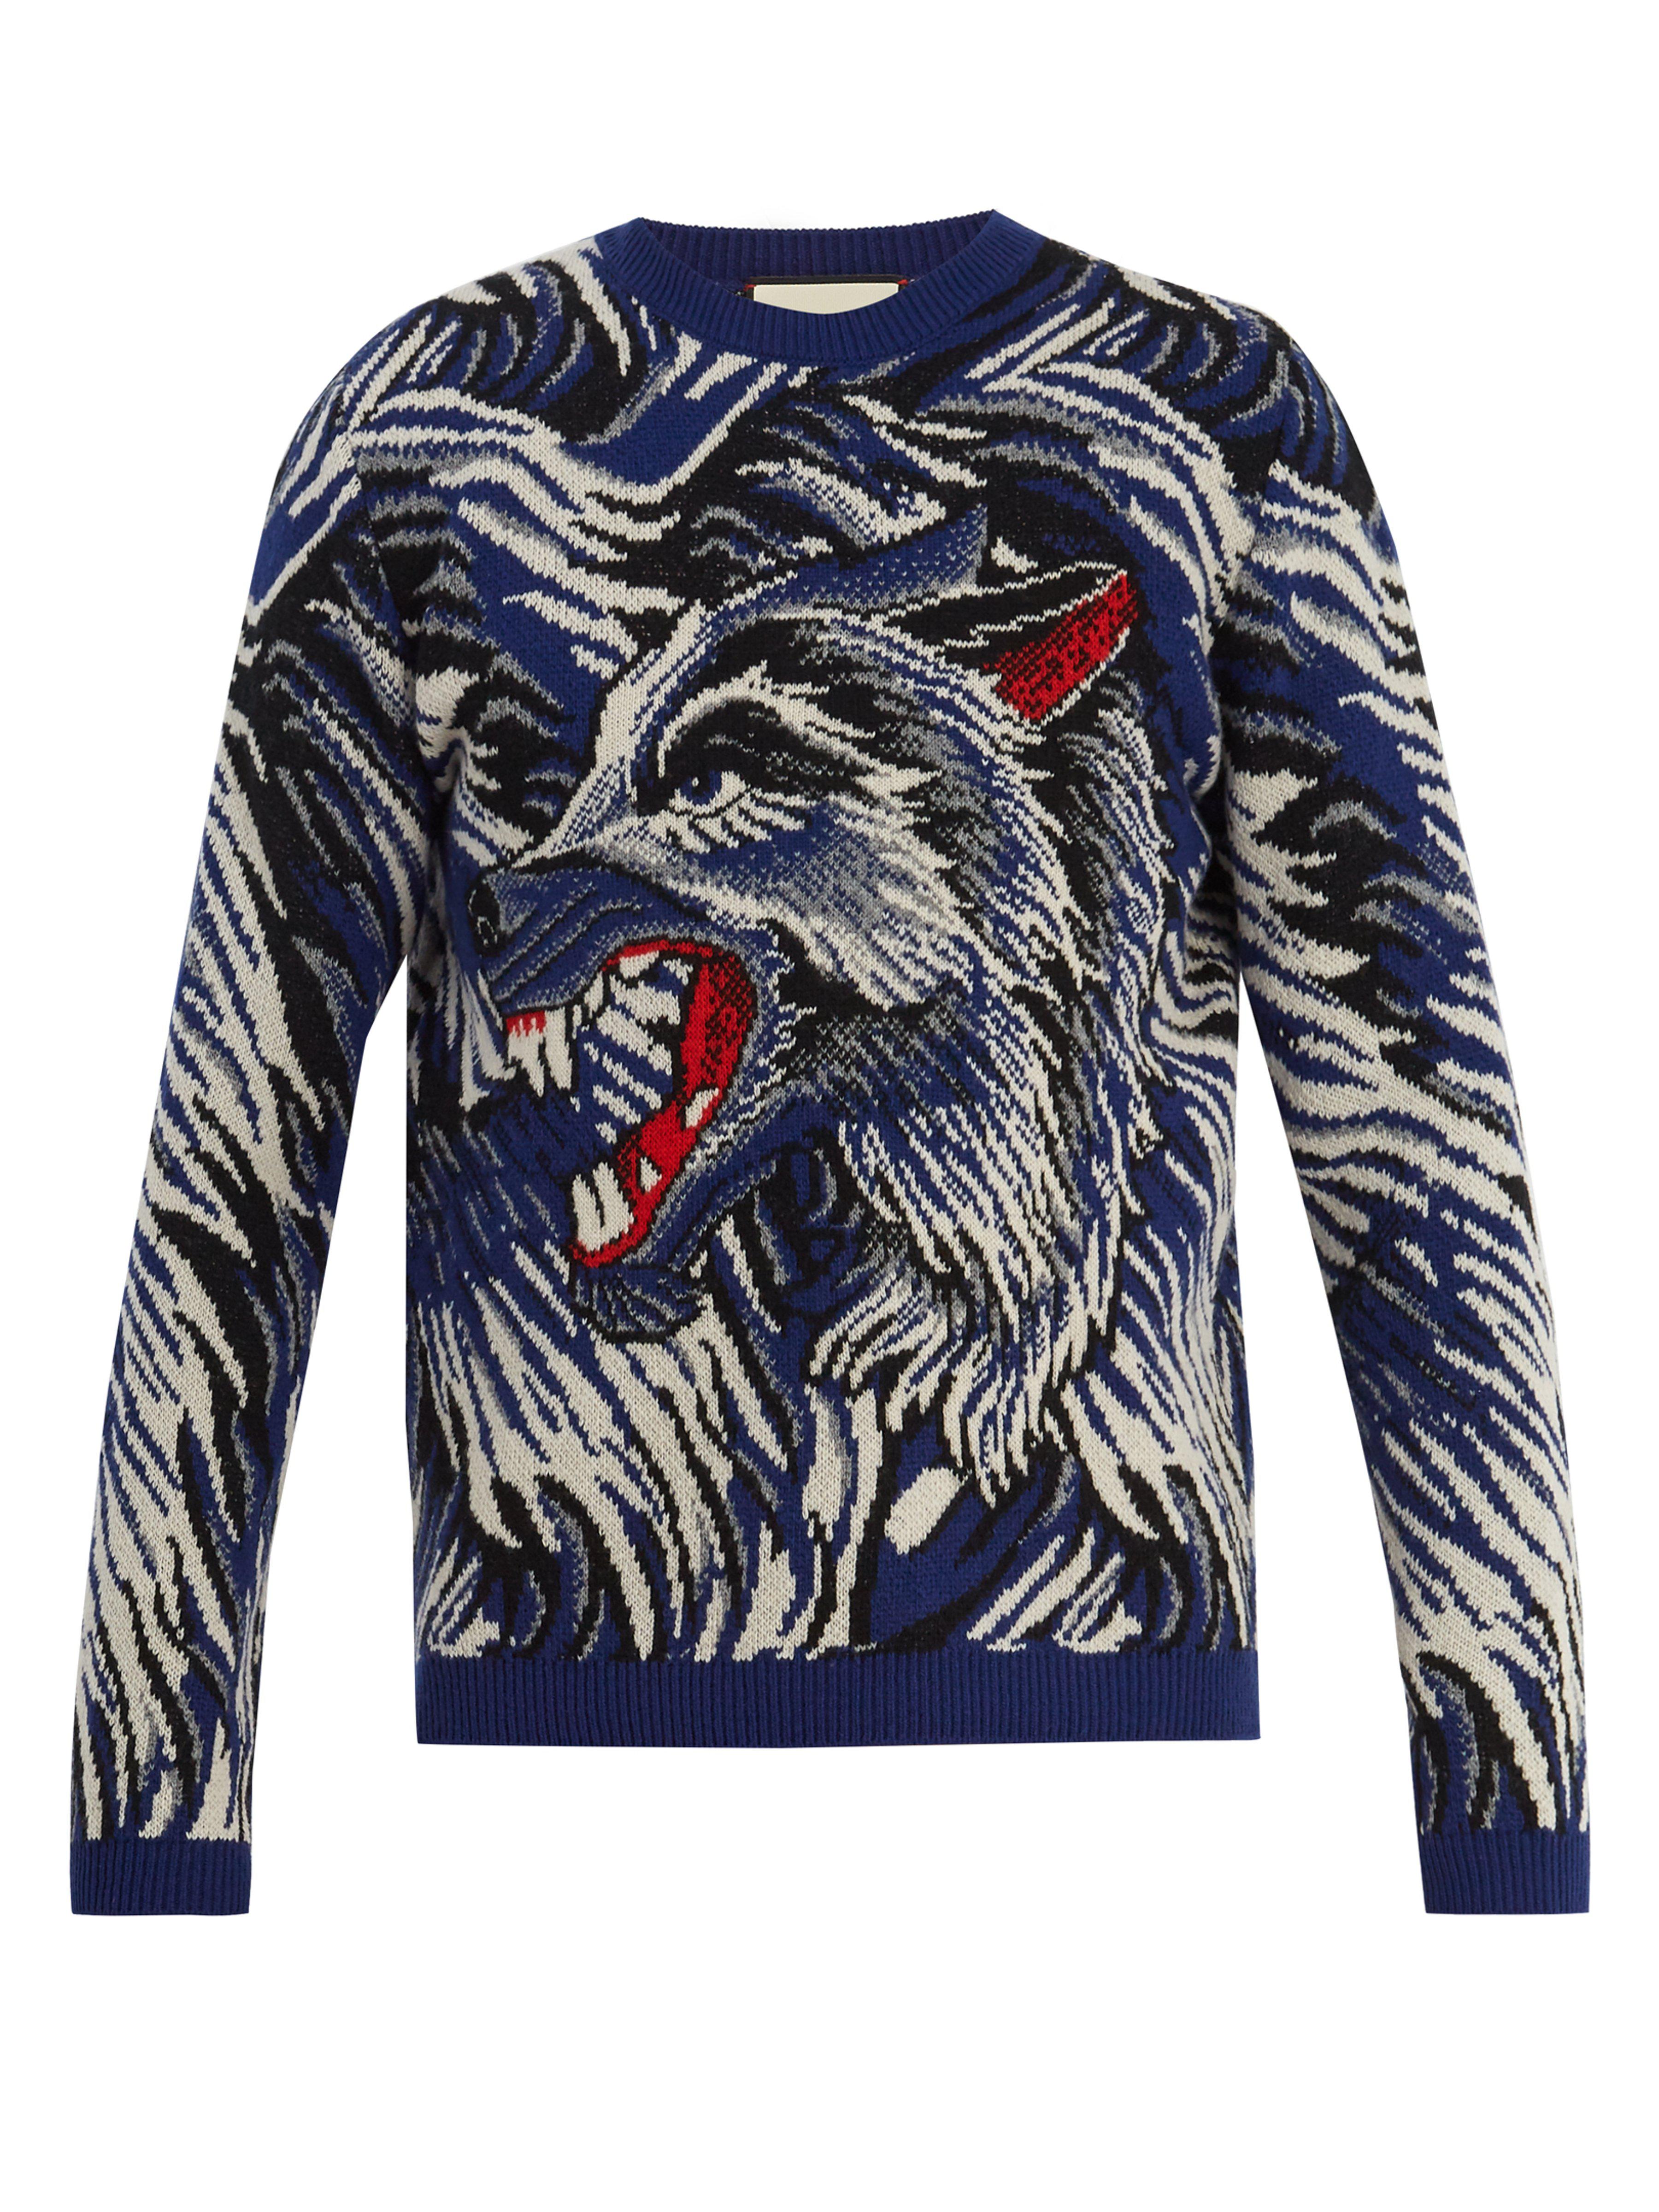 Gucci Wolf Intarsia Knit Wool Sweater in Blue for Men - Lyst